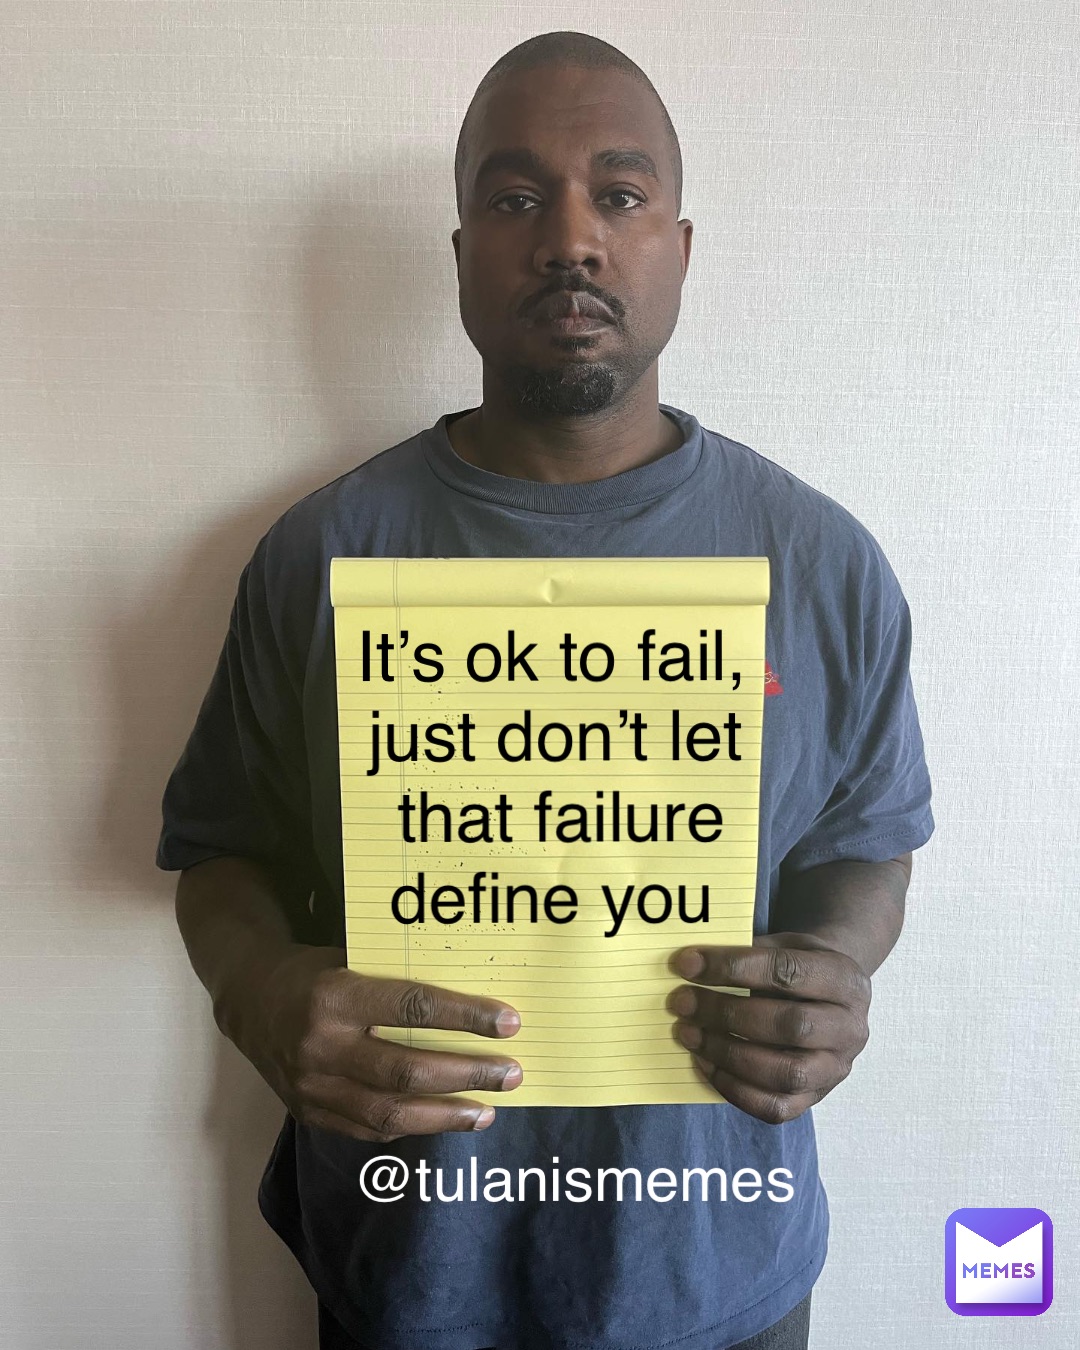 It’s ok to fail, just don’t let that failure define you